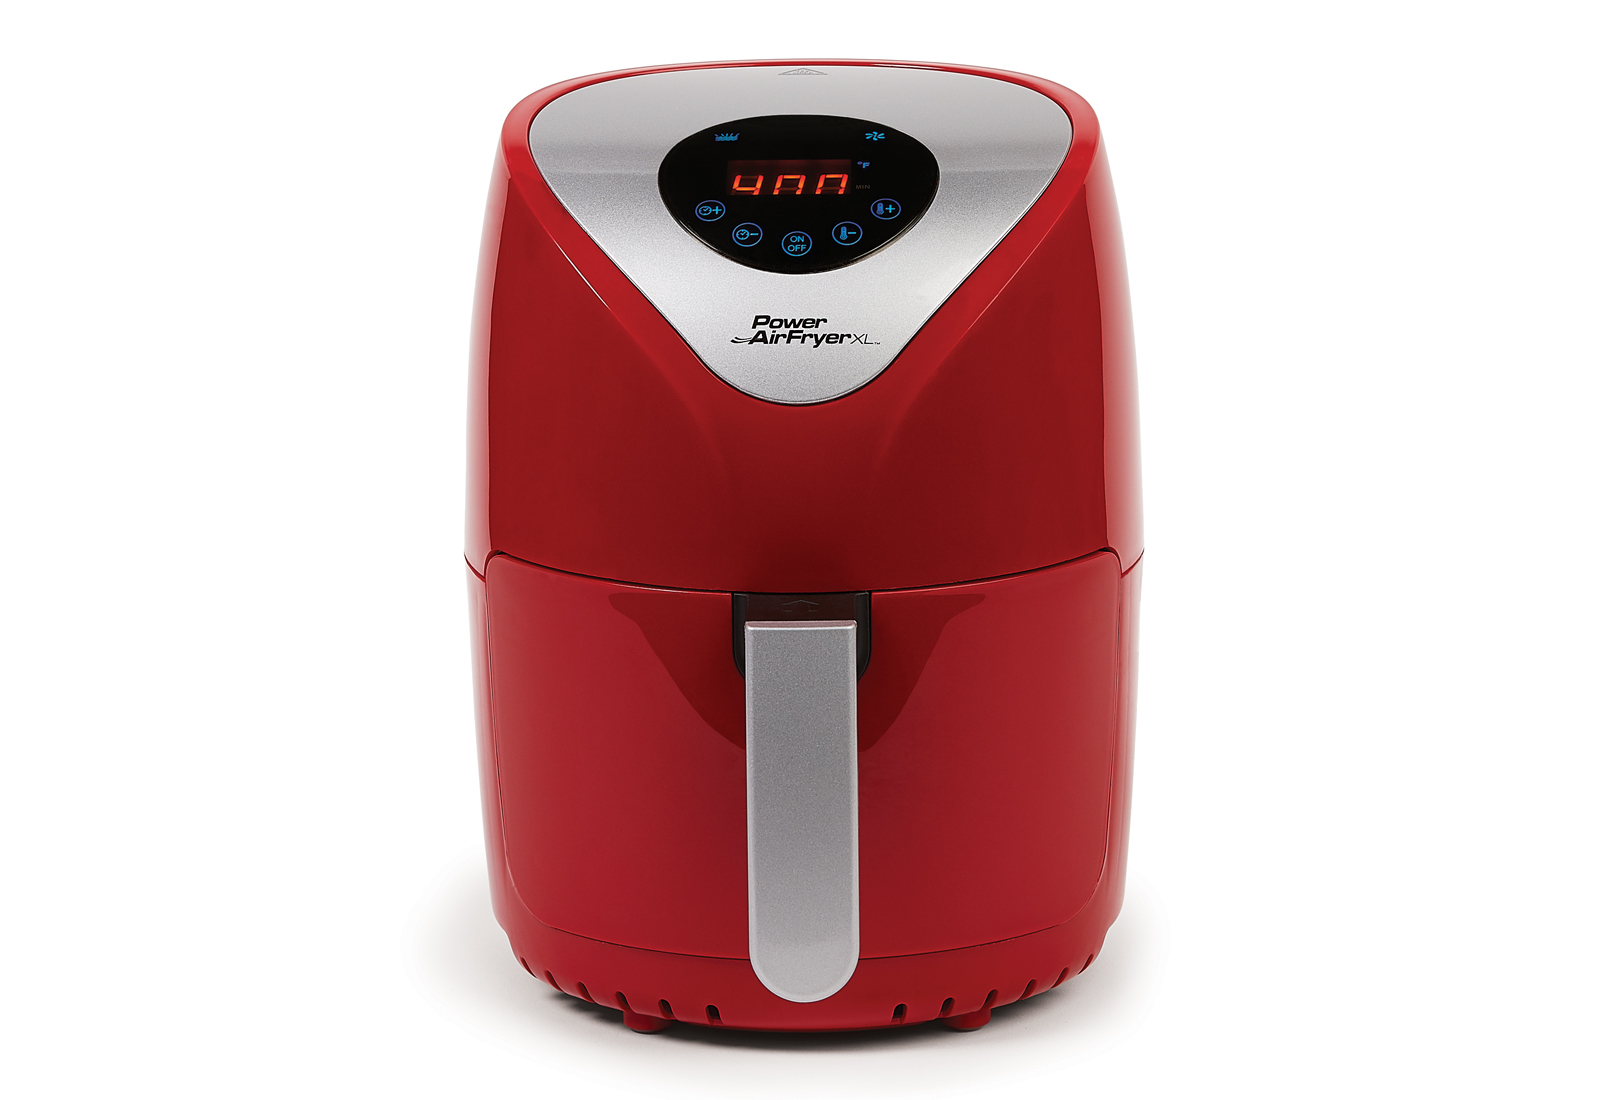 Power AirFryer XL 2QT Product Image